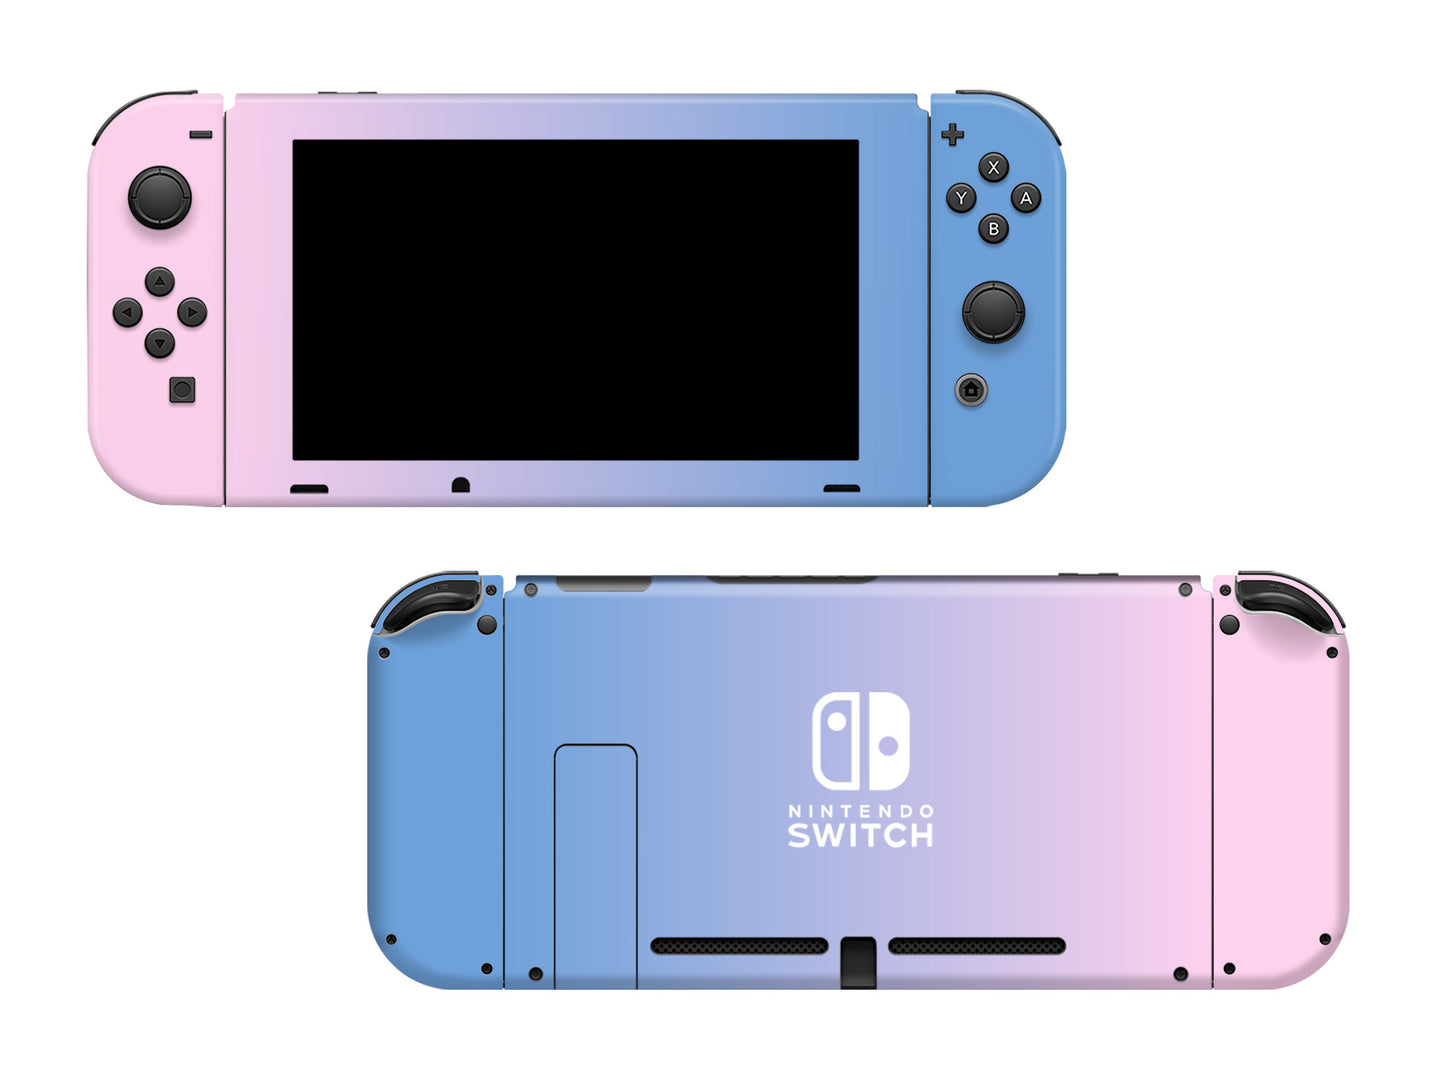 Pale Pink to Soft Blue Ombre Full Wrap Vinyl Skin for Nintendo Switch